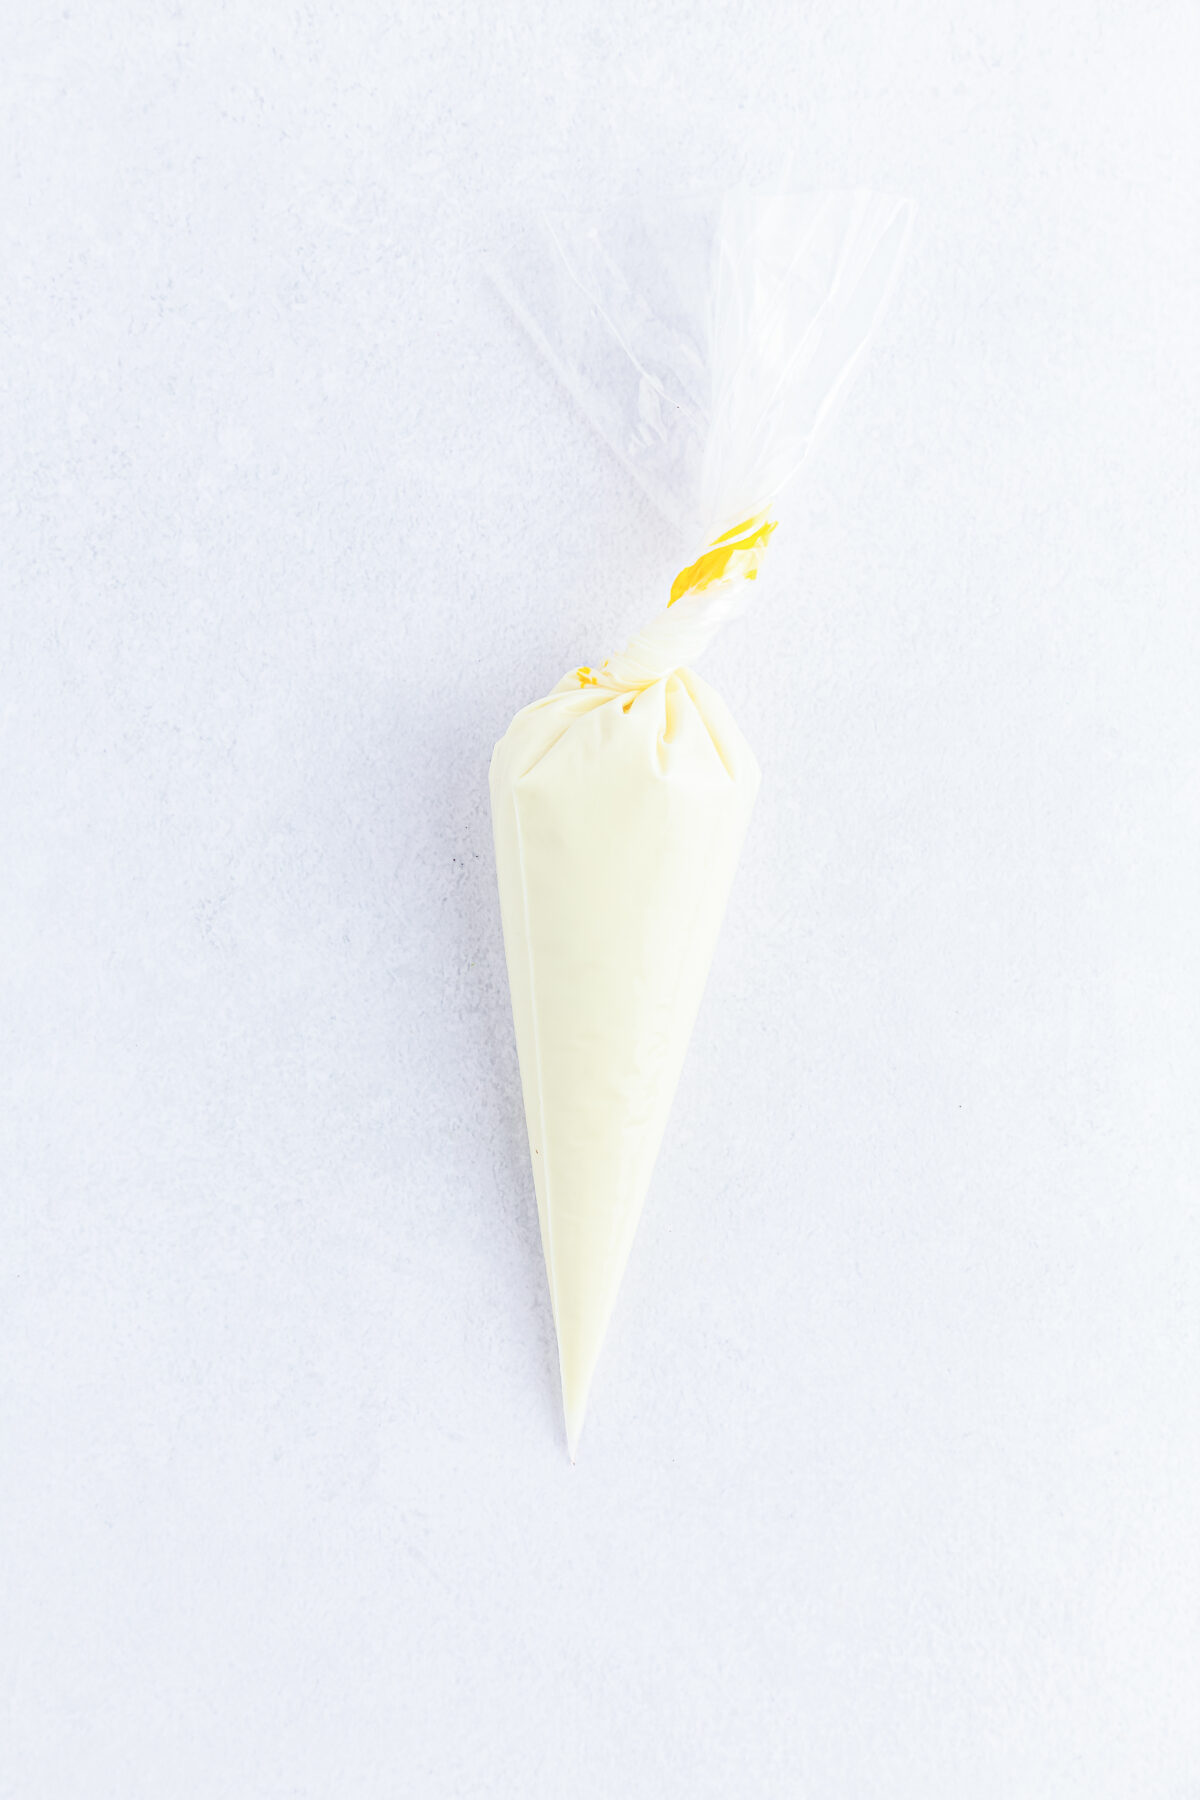 White chocolate in a piping bag.